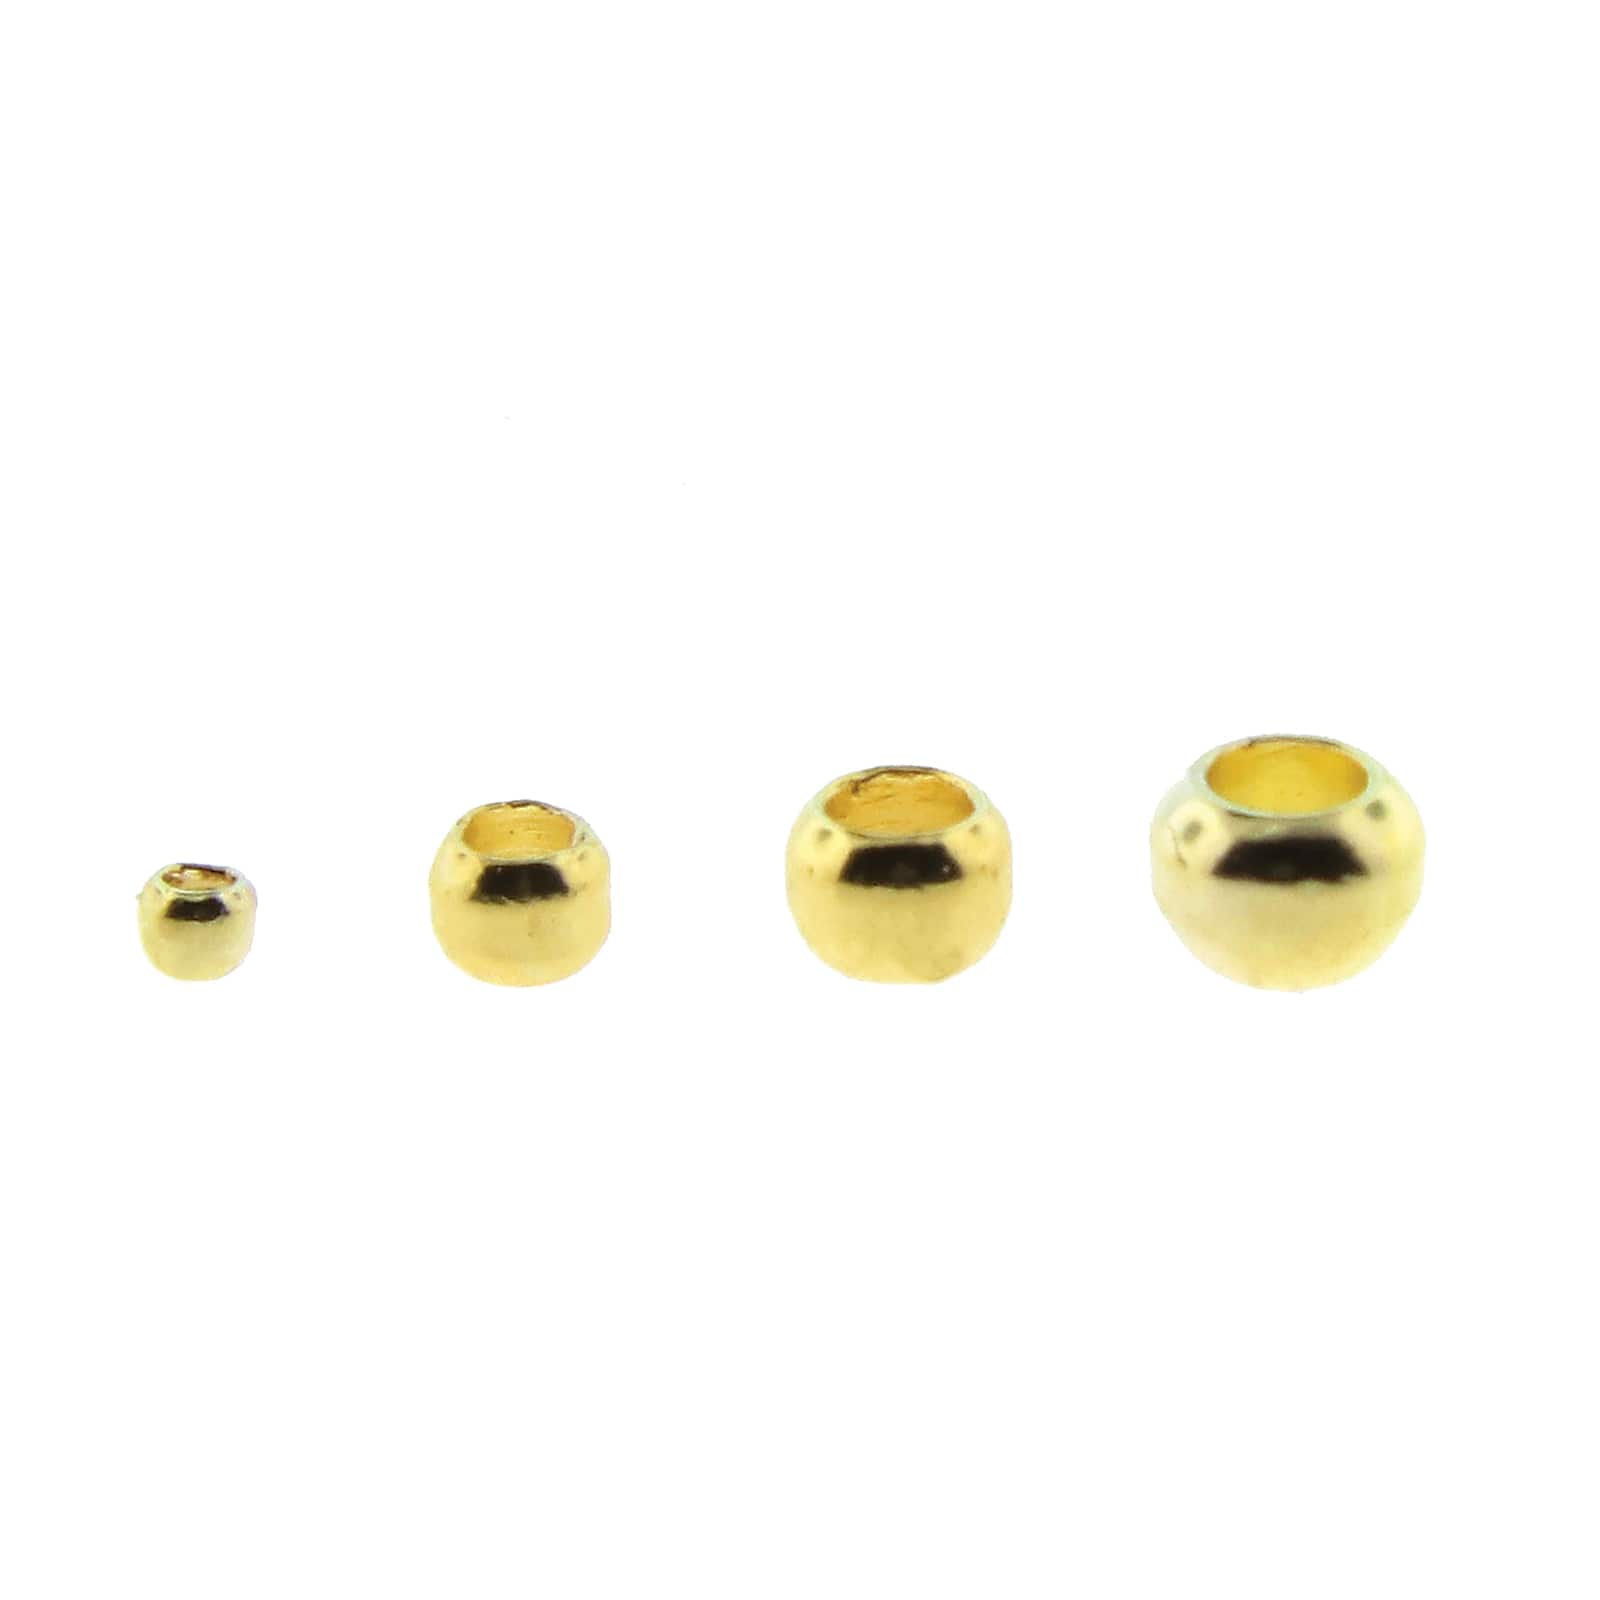 The Beadsmith&#xAE; Assorted Gold Plated Crimp Beads, 600ct.